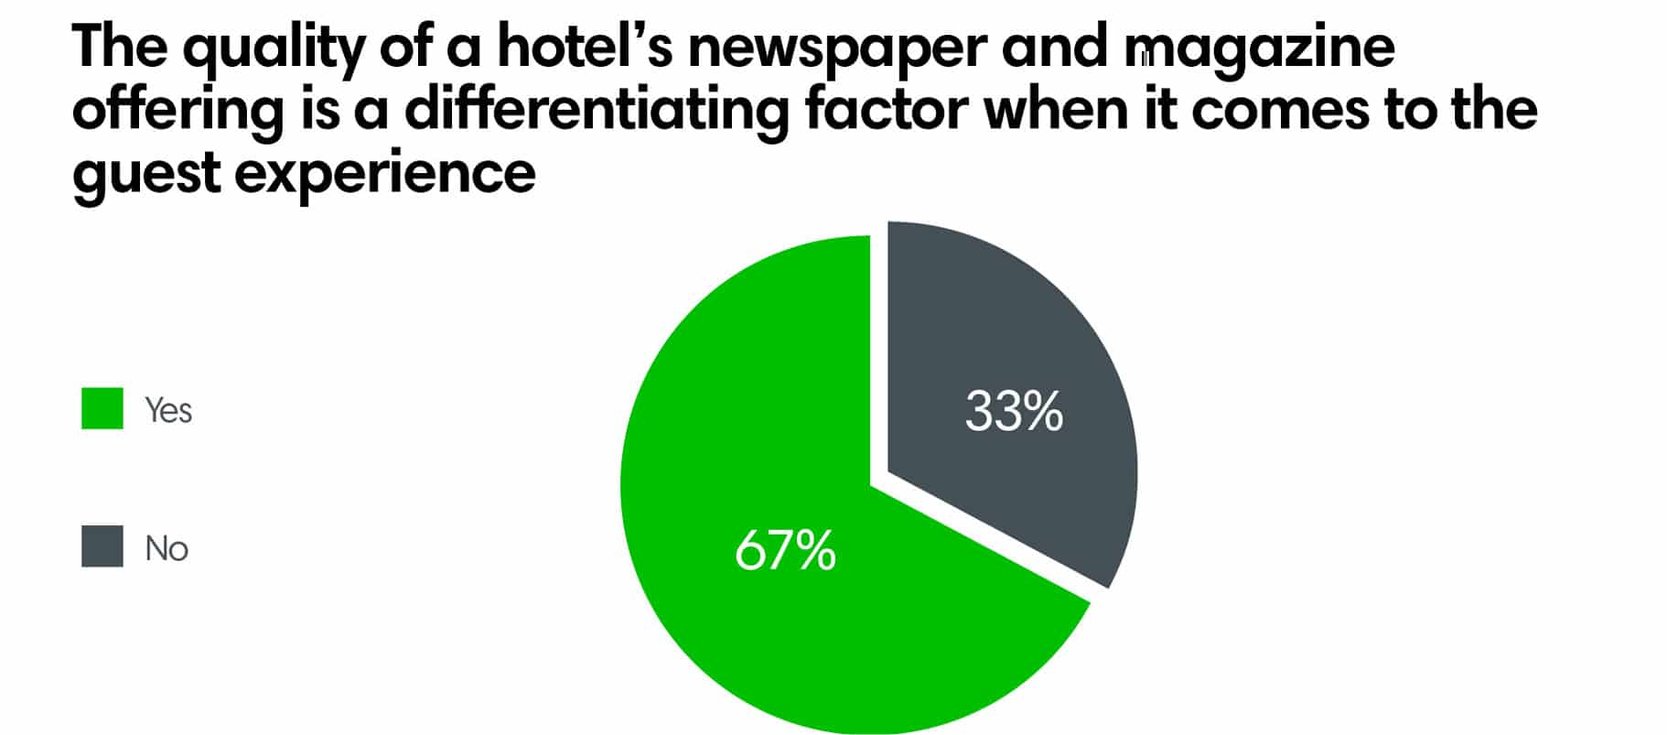 The quality of a hotel's newspaper and magazine offering is a differentiating factor when it comes to the guest experience